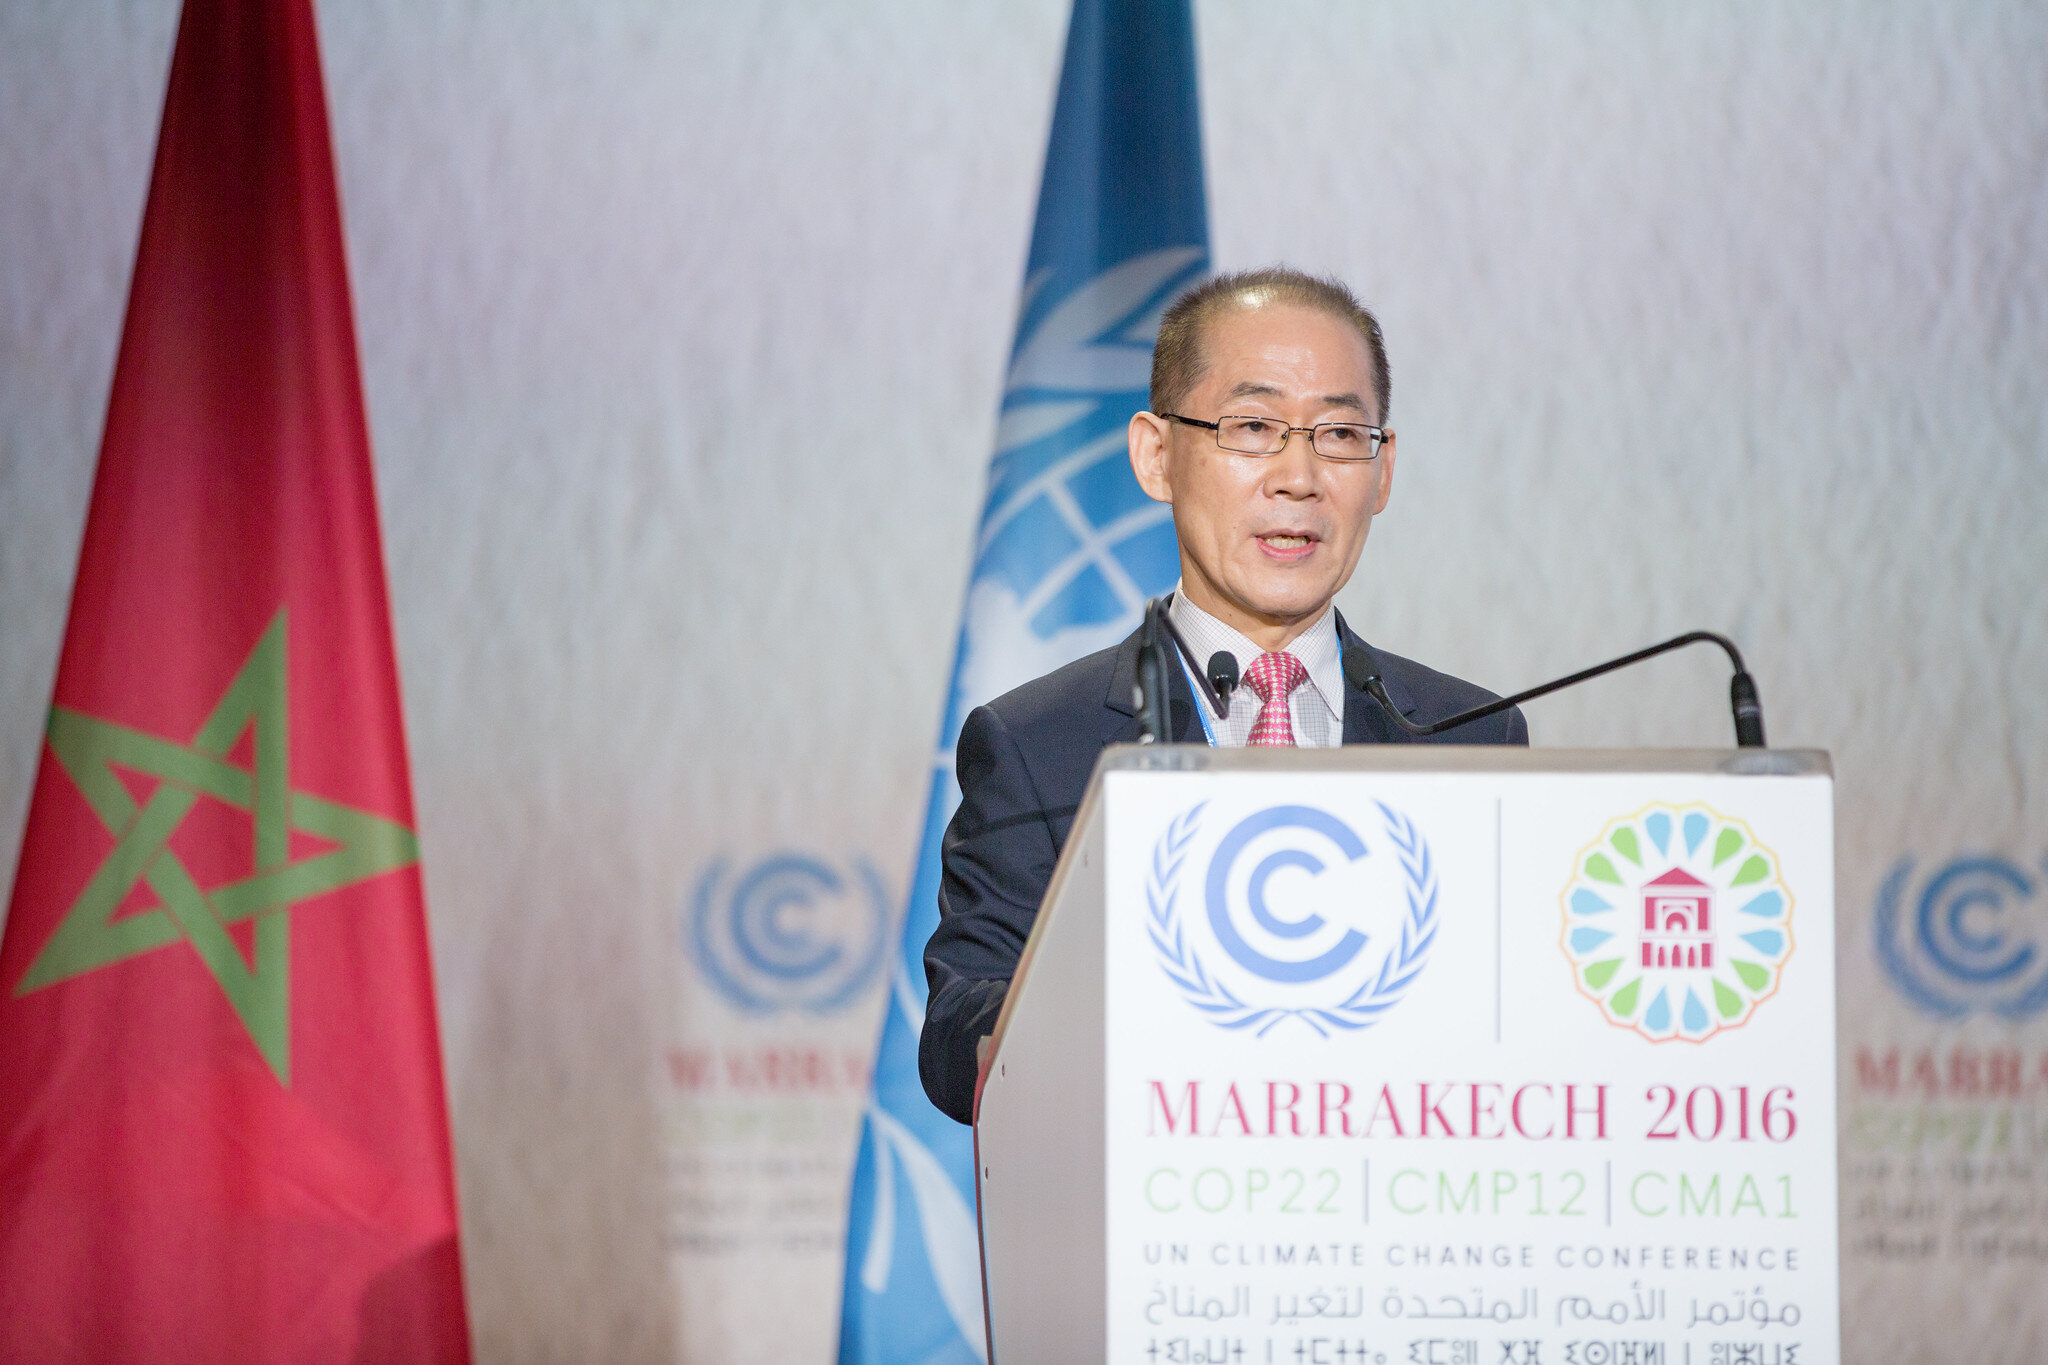 “If” Becomes the Theme as the UN Climate Change Panel in Madrid Concludes with Mixed Results